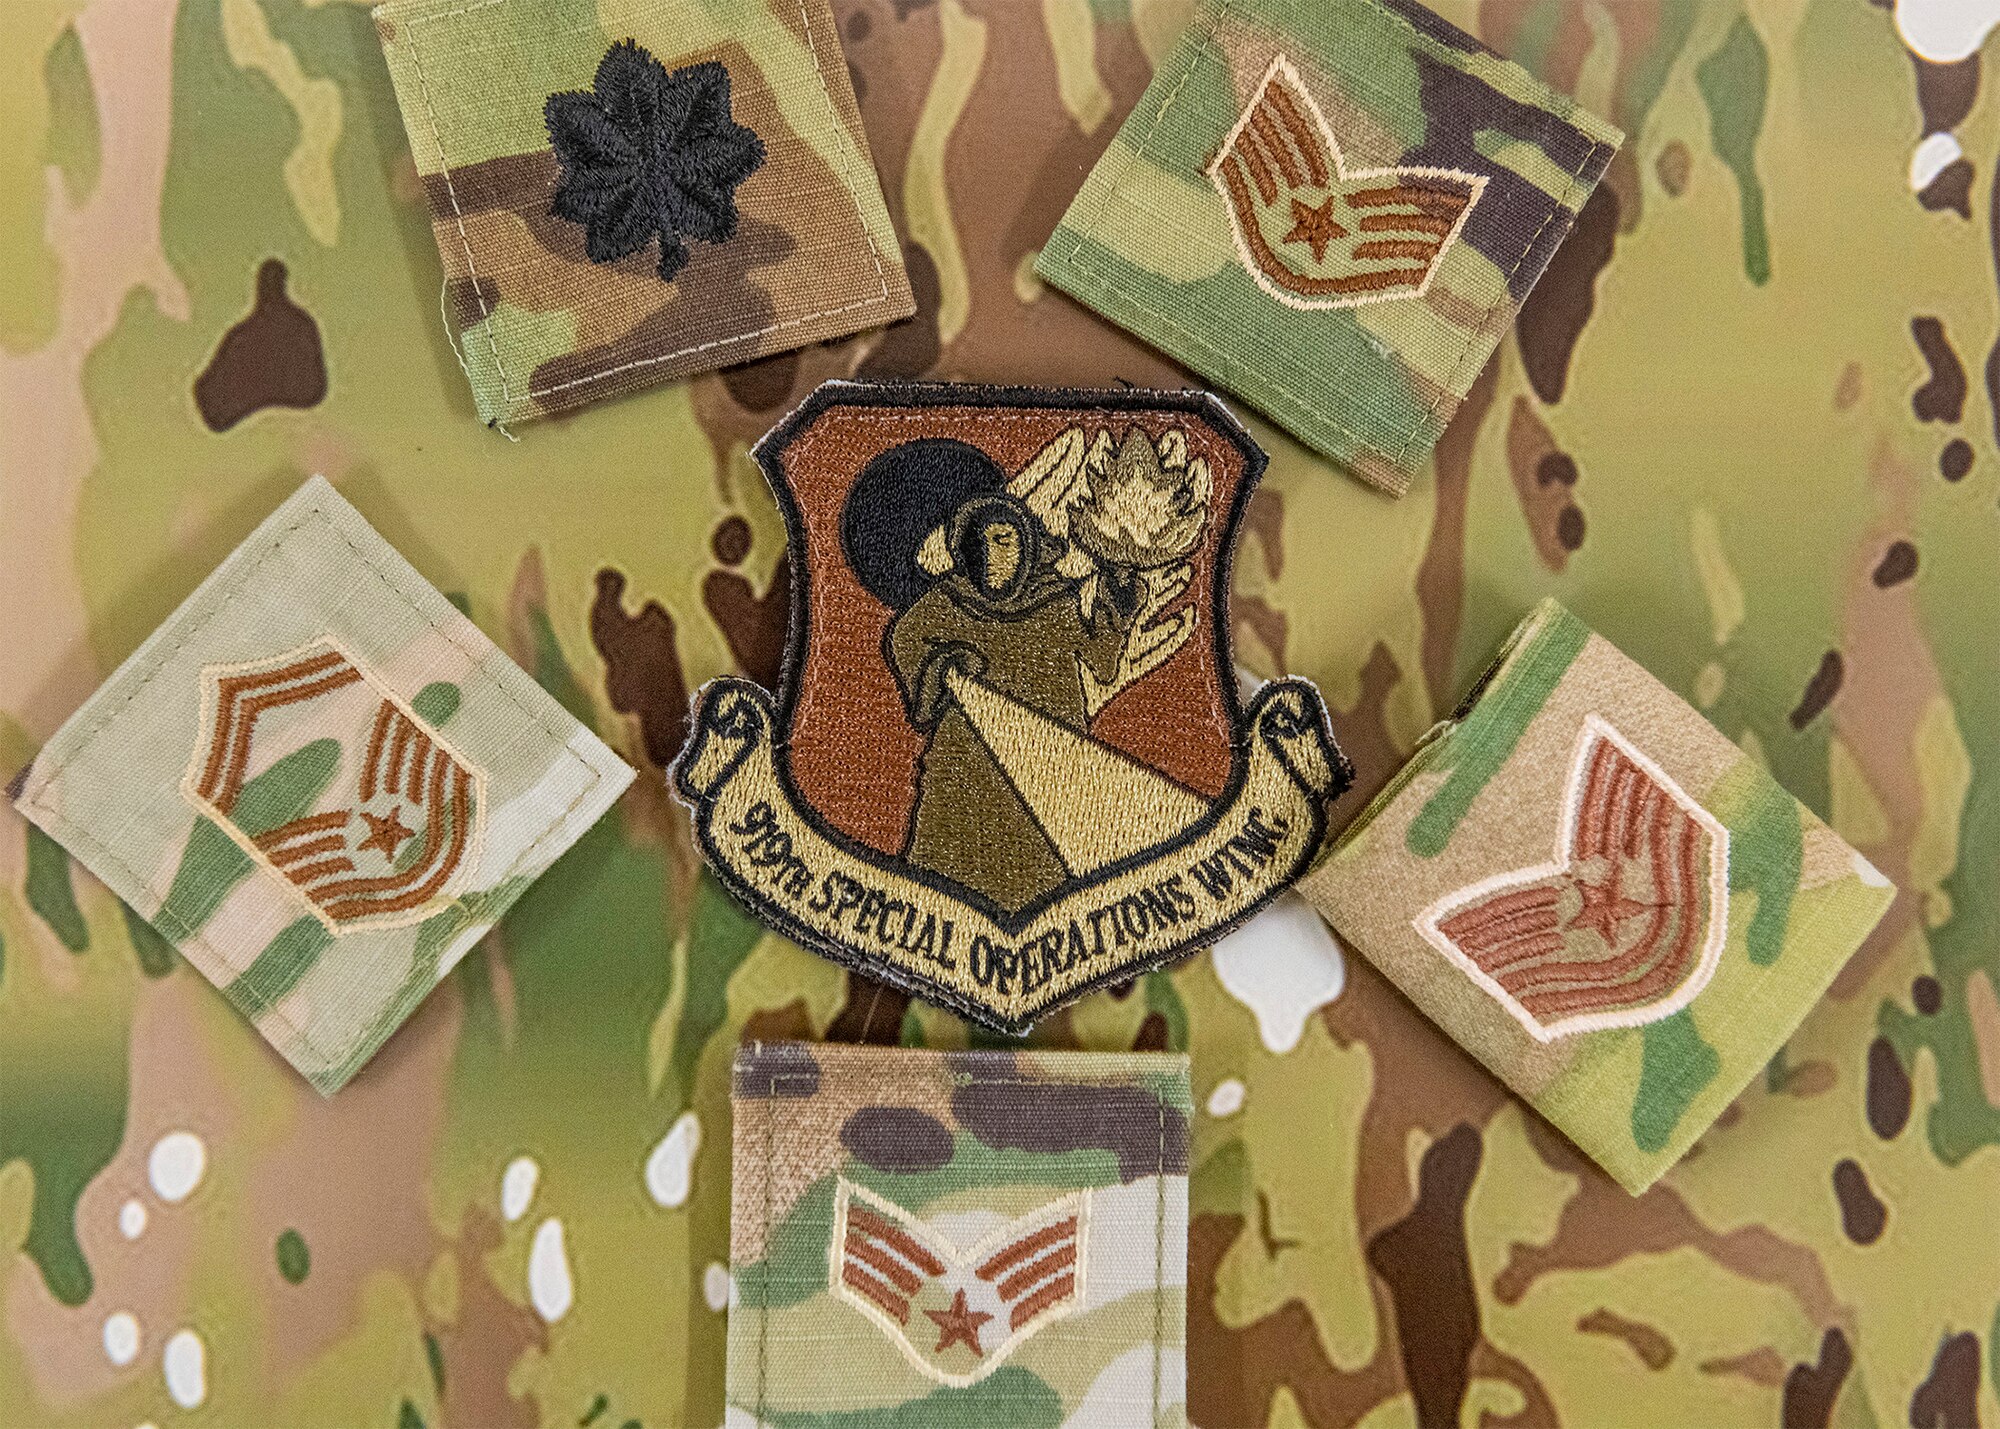 military rank patches placed on military uniform